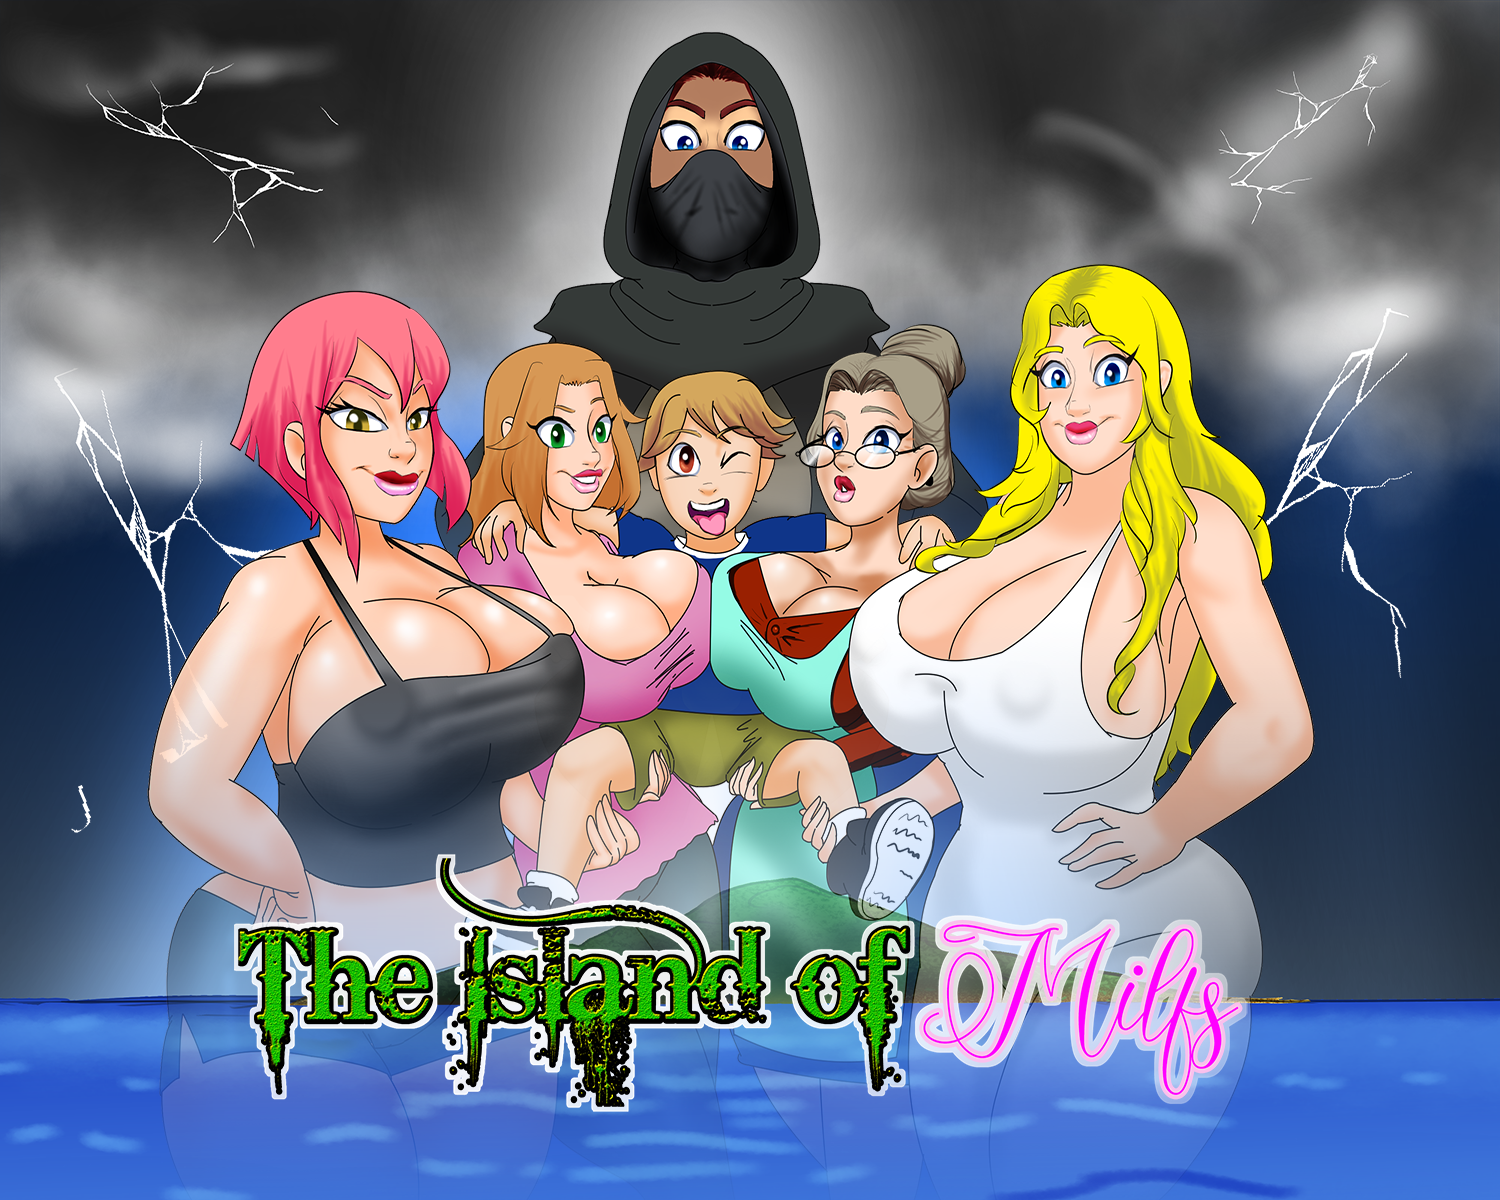 1581705_Island_of_the_milfs_poster_f95zone.png